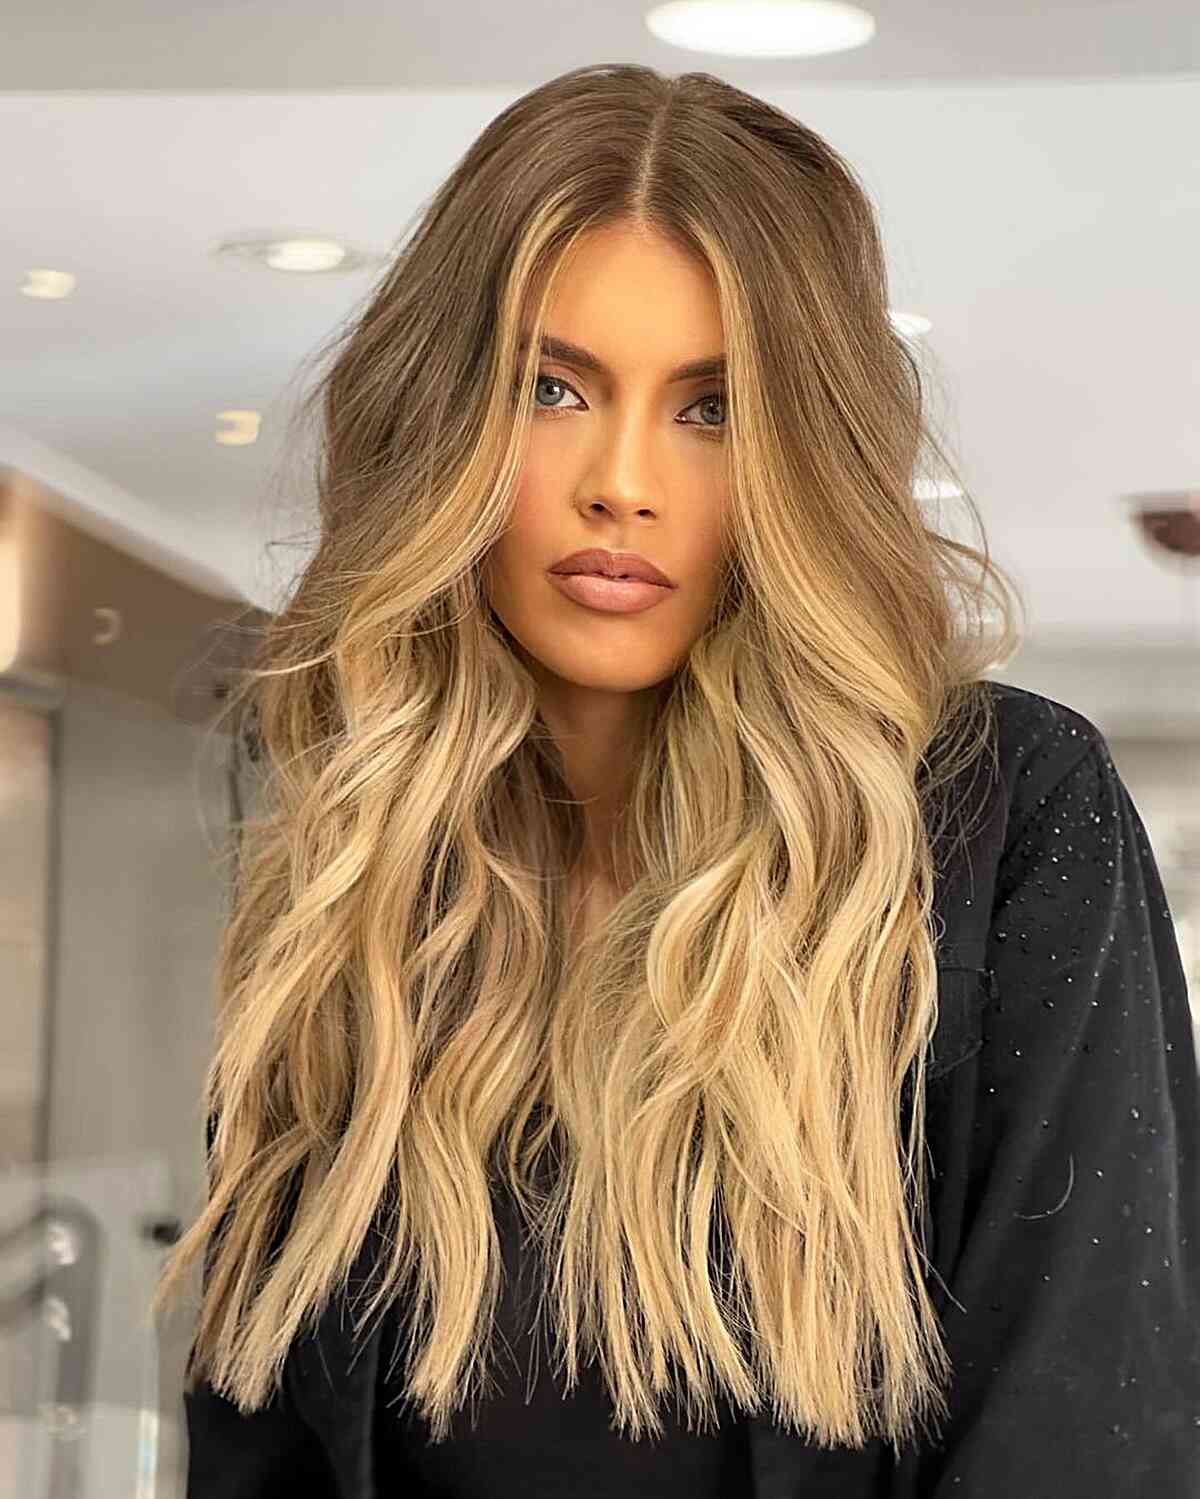 Effortless Long and Blunt Cut for women with blonde hair